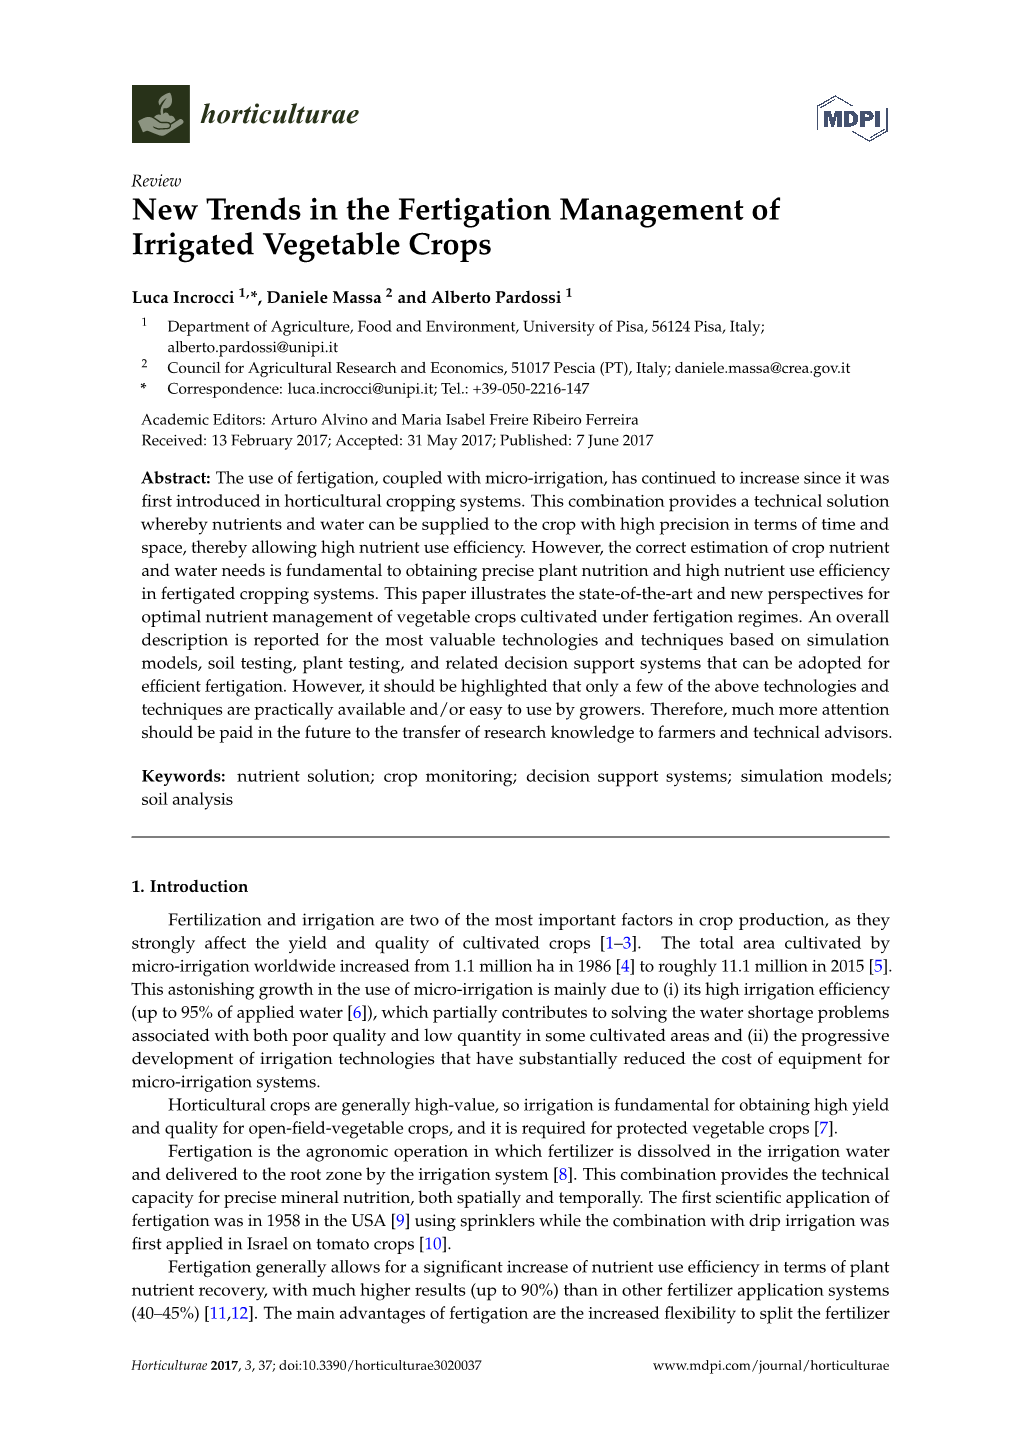 New Trends in the Fertigation Management of Irrigated Vegetable Crops